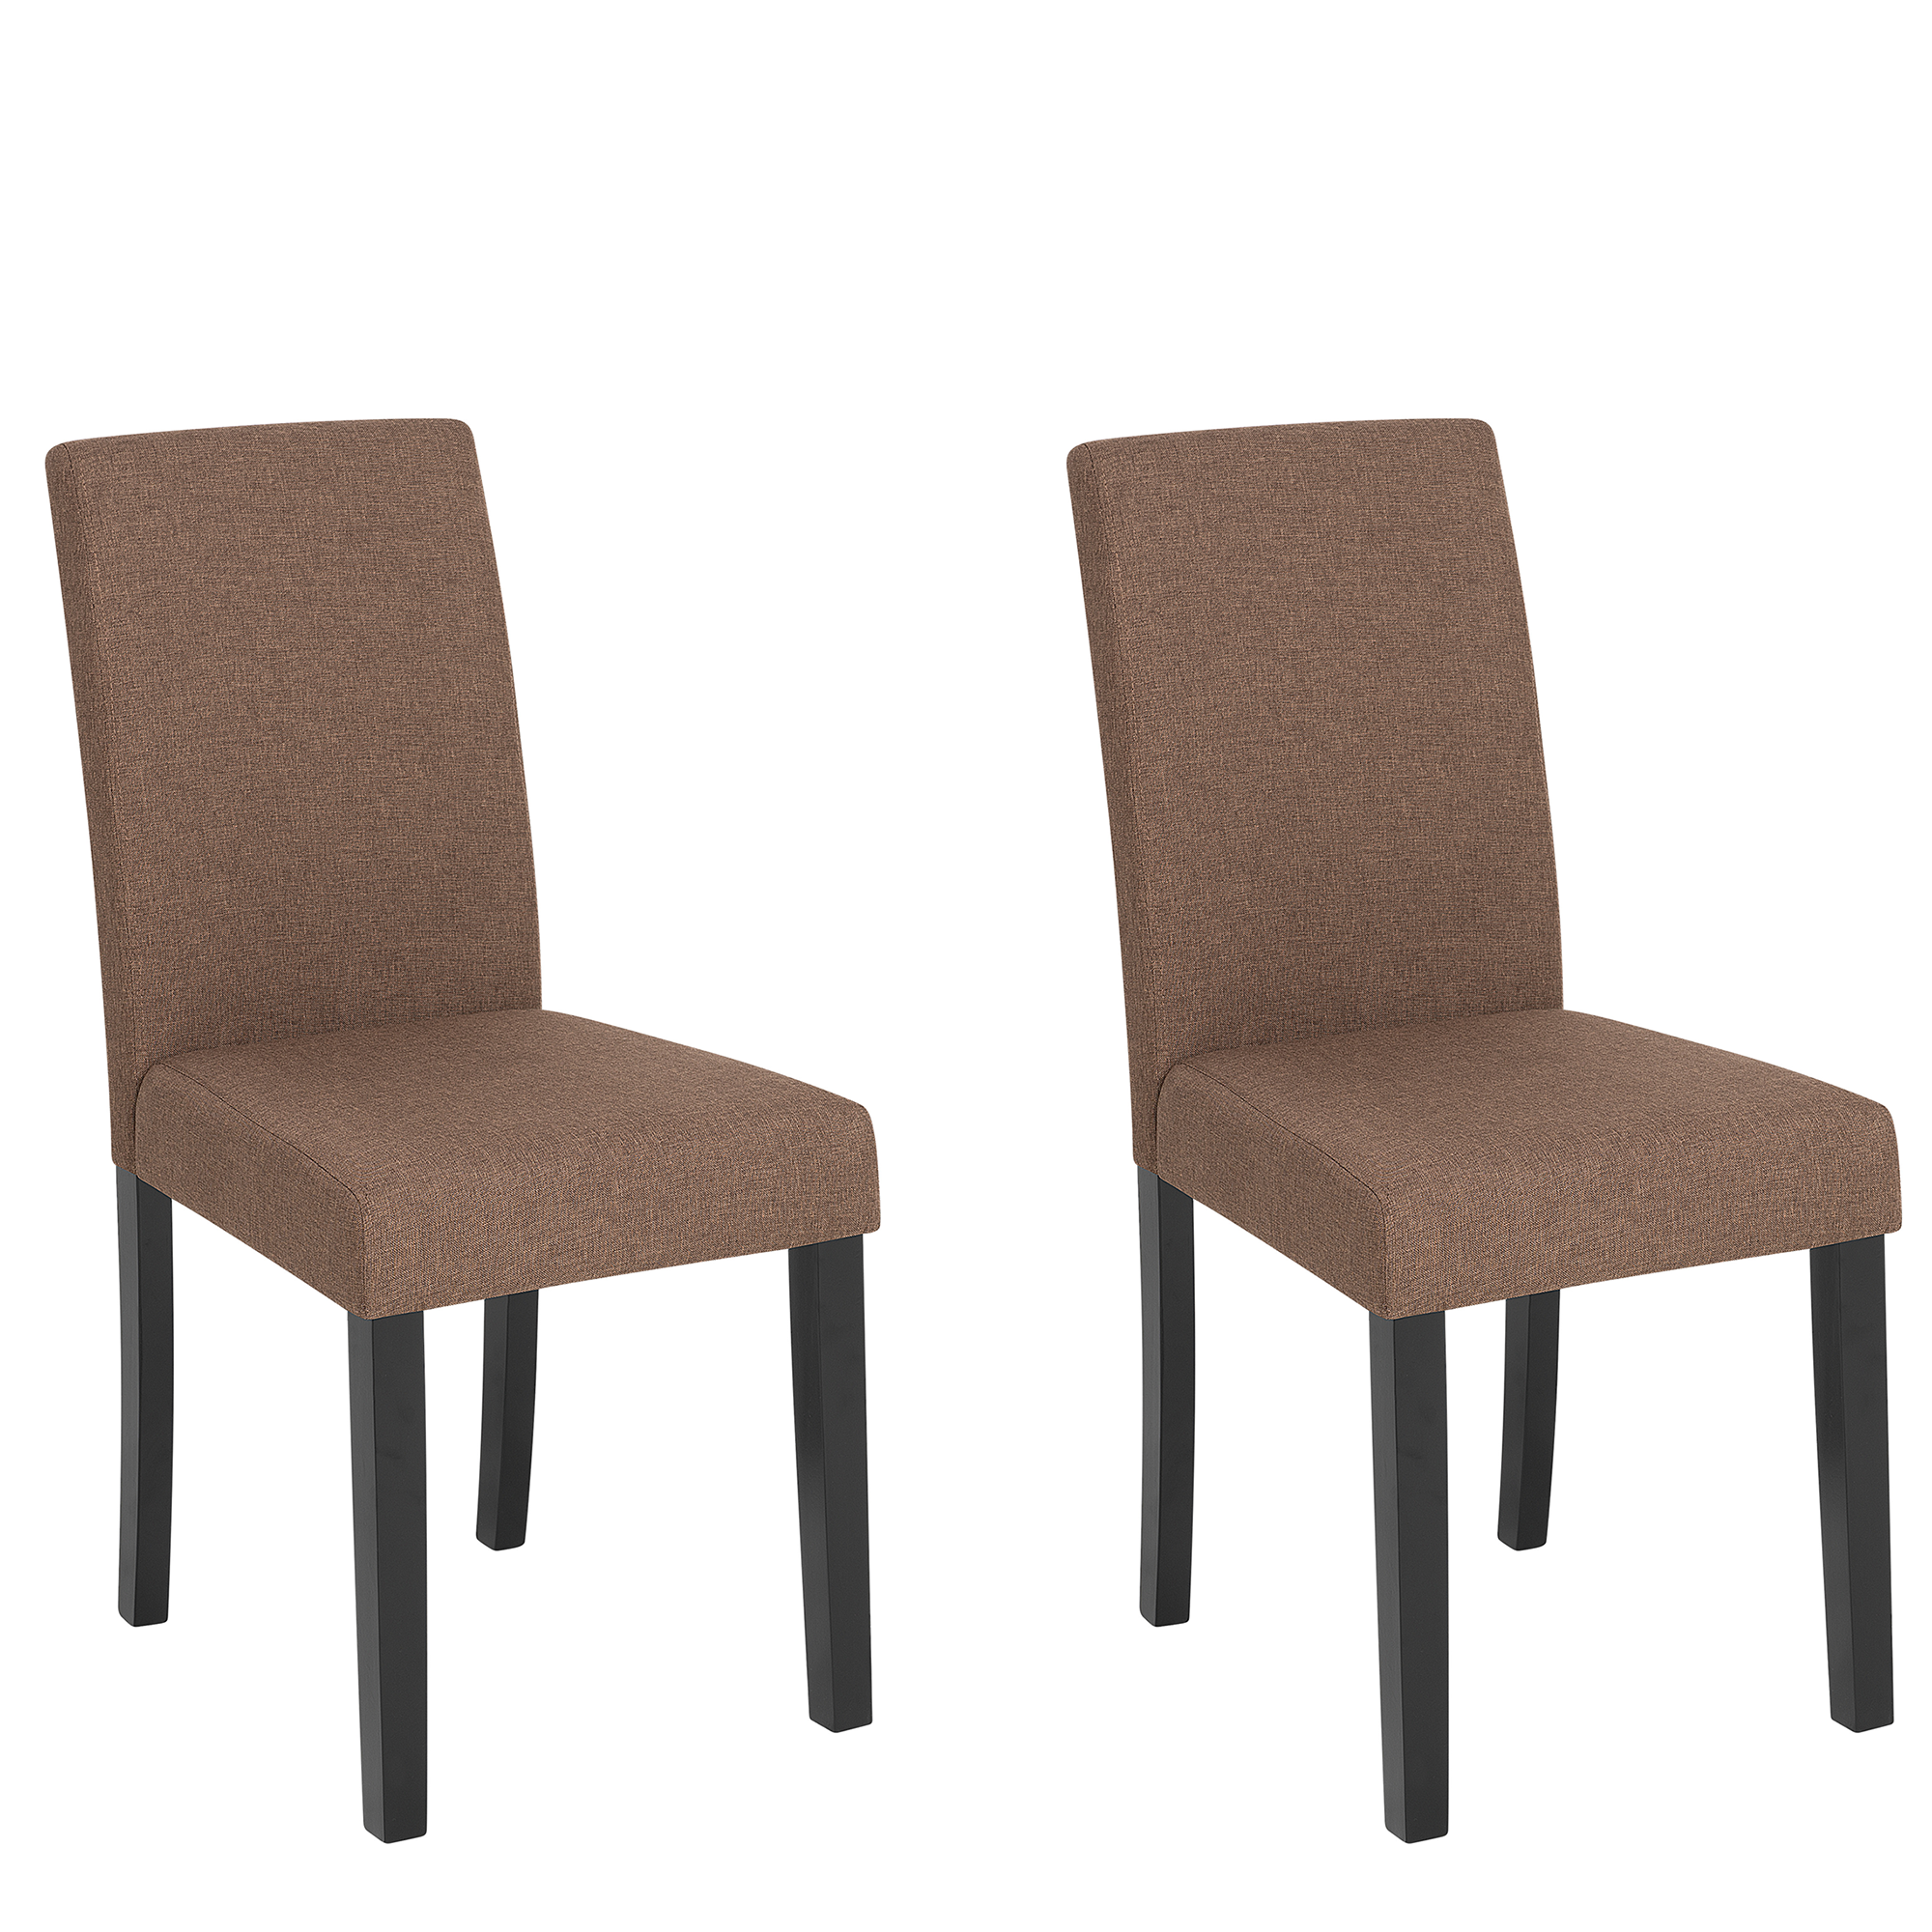 Beliani Set of 2 Dining Chairs Brown Fabric Wooden Legs Modern